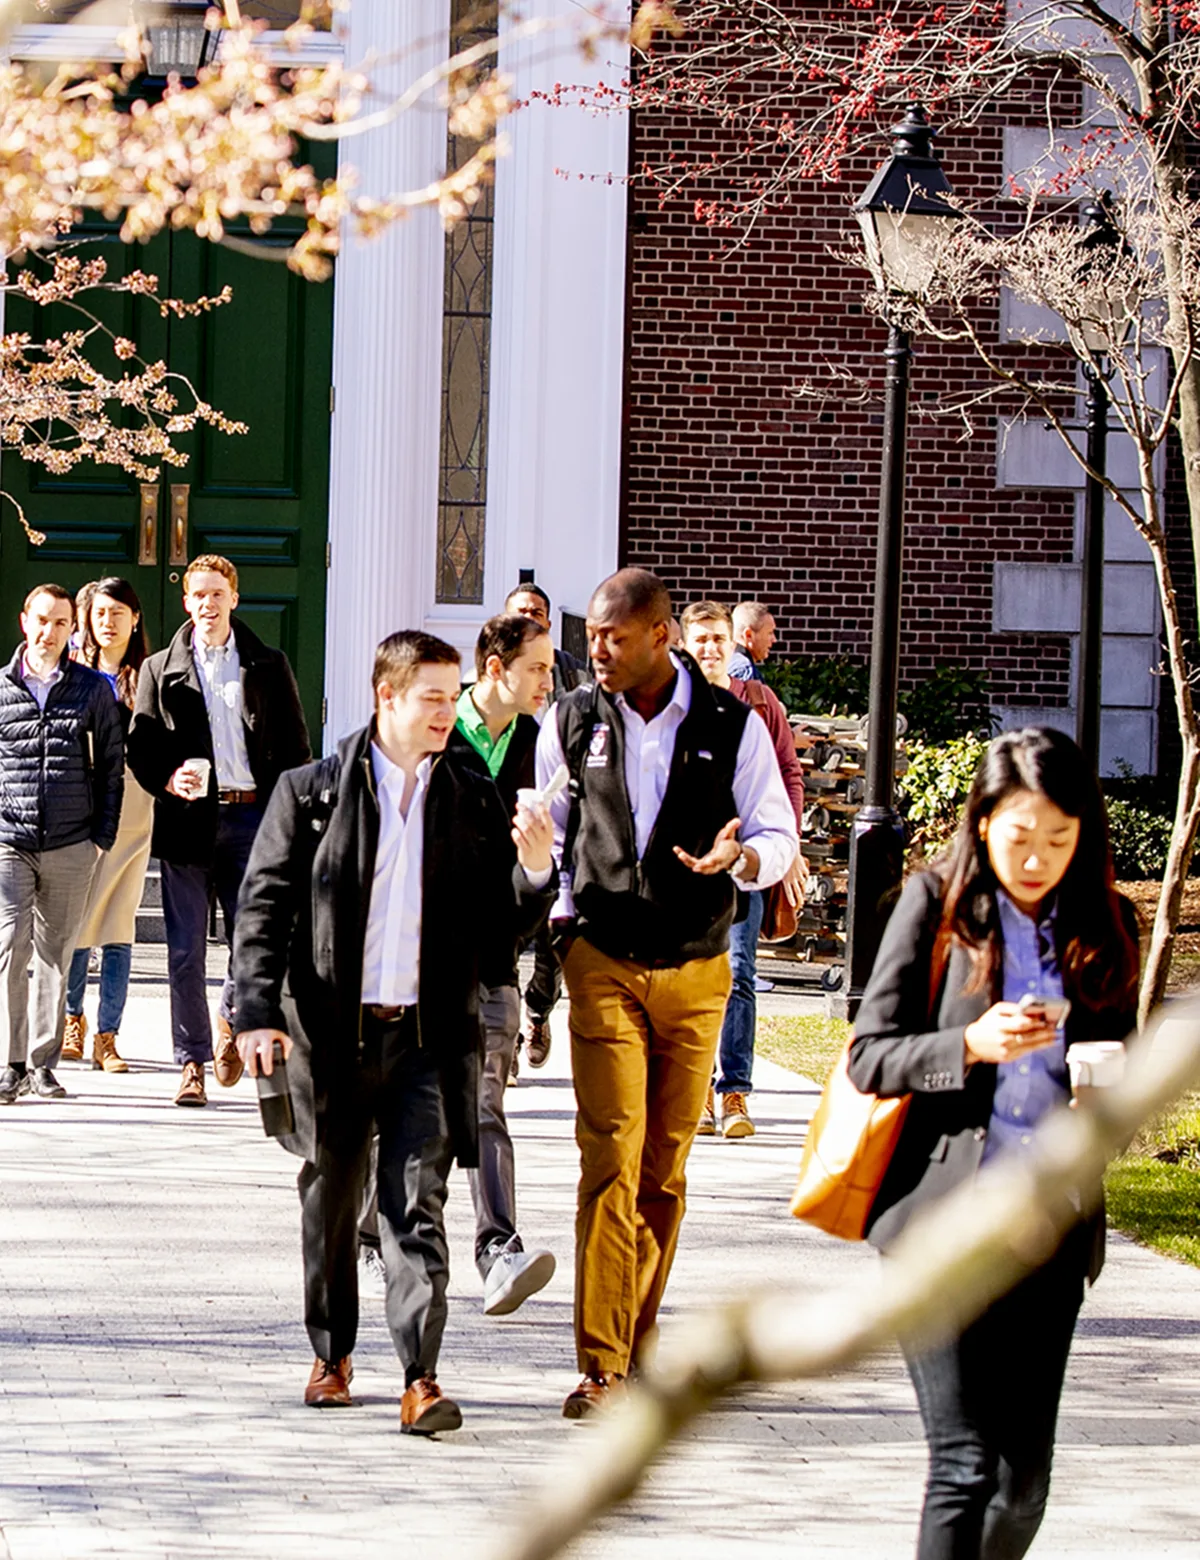 MBA students continue their education walking from the student center to the classroom.